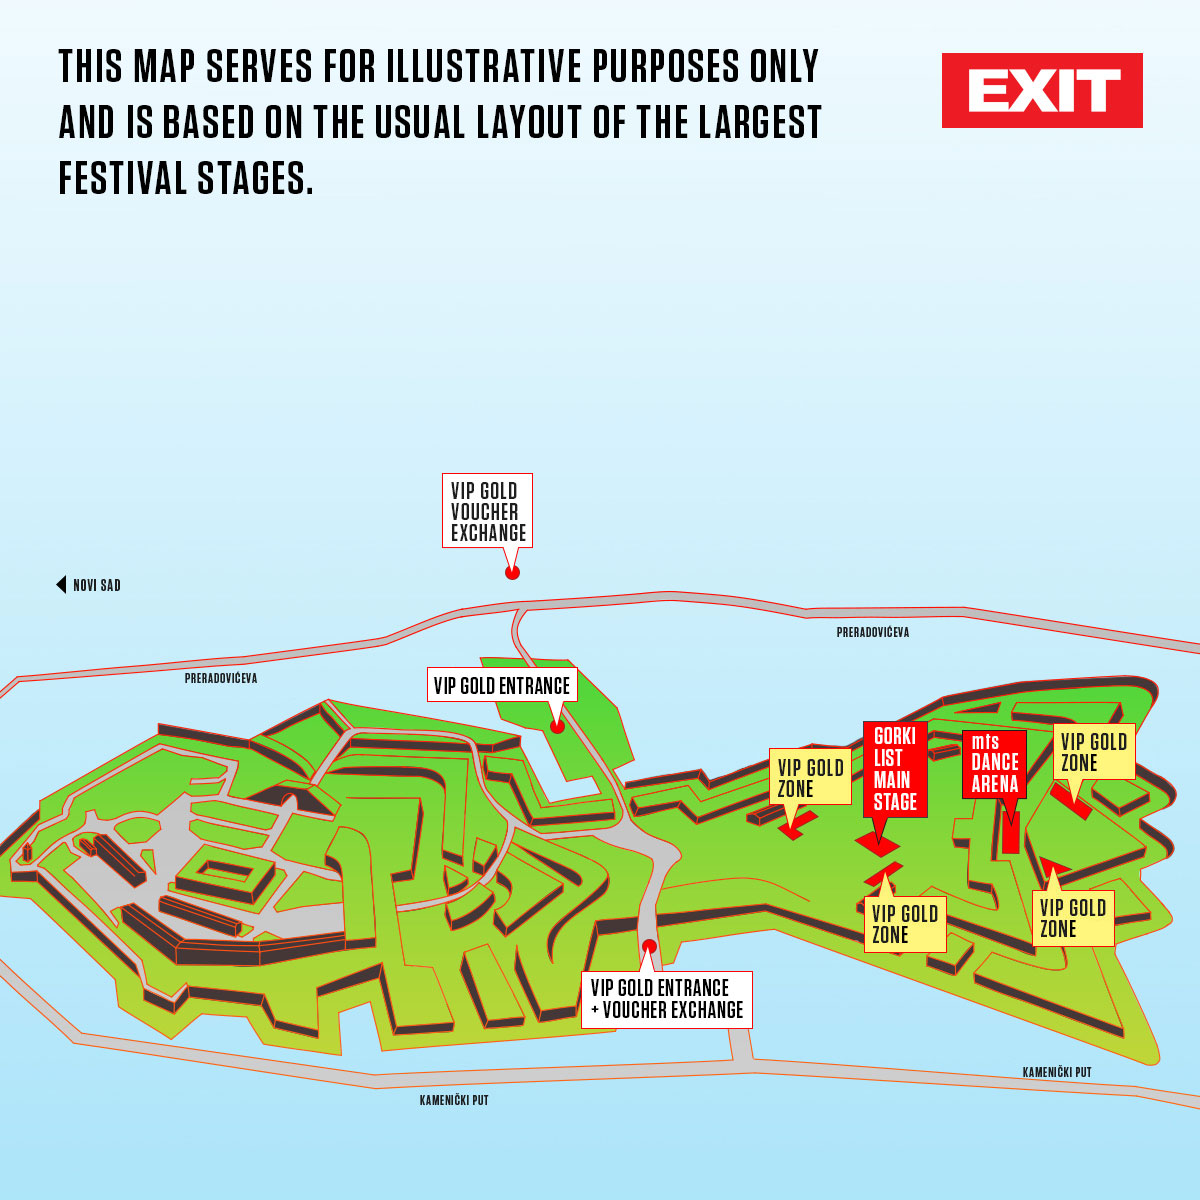 EXIT map